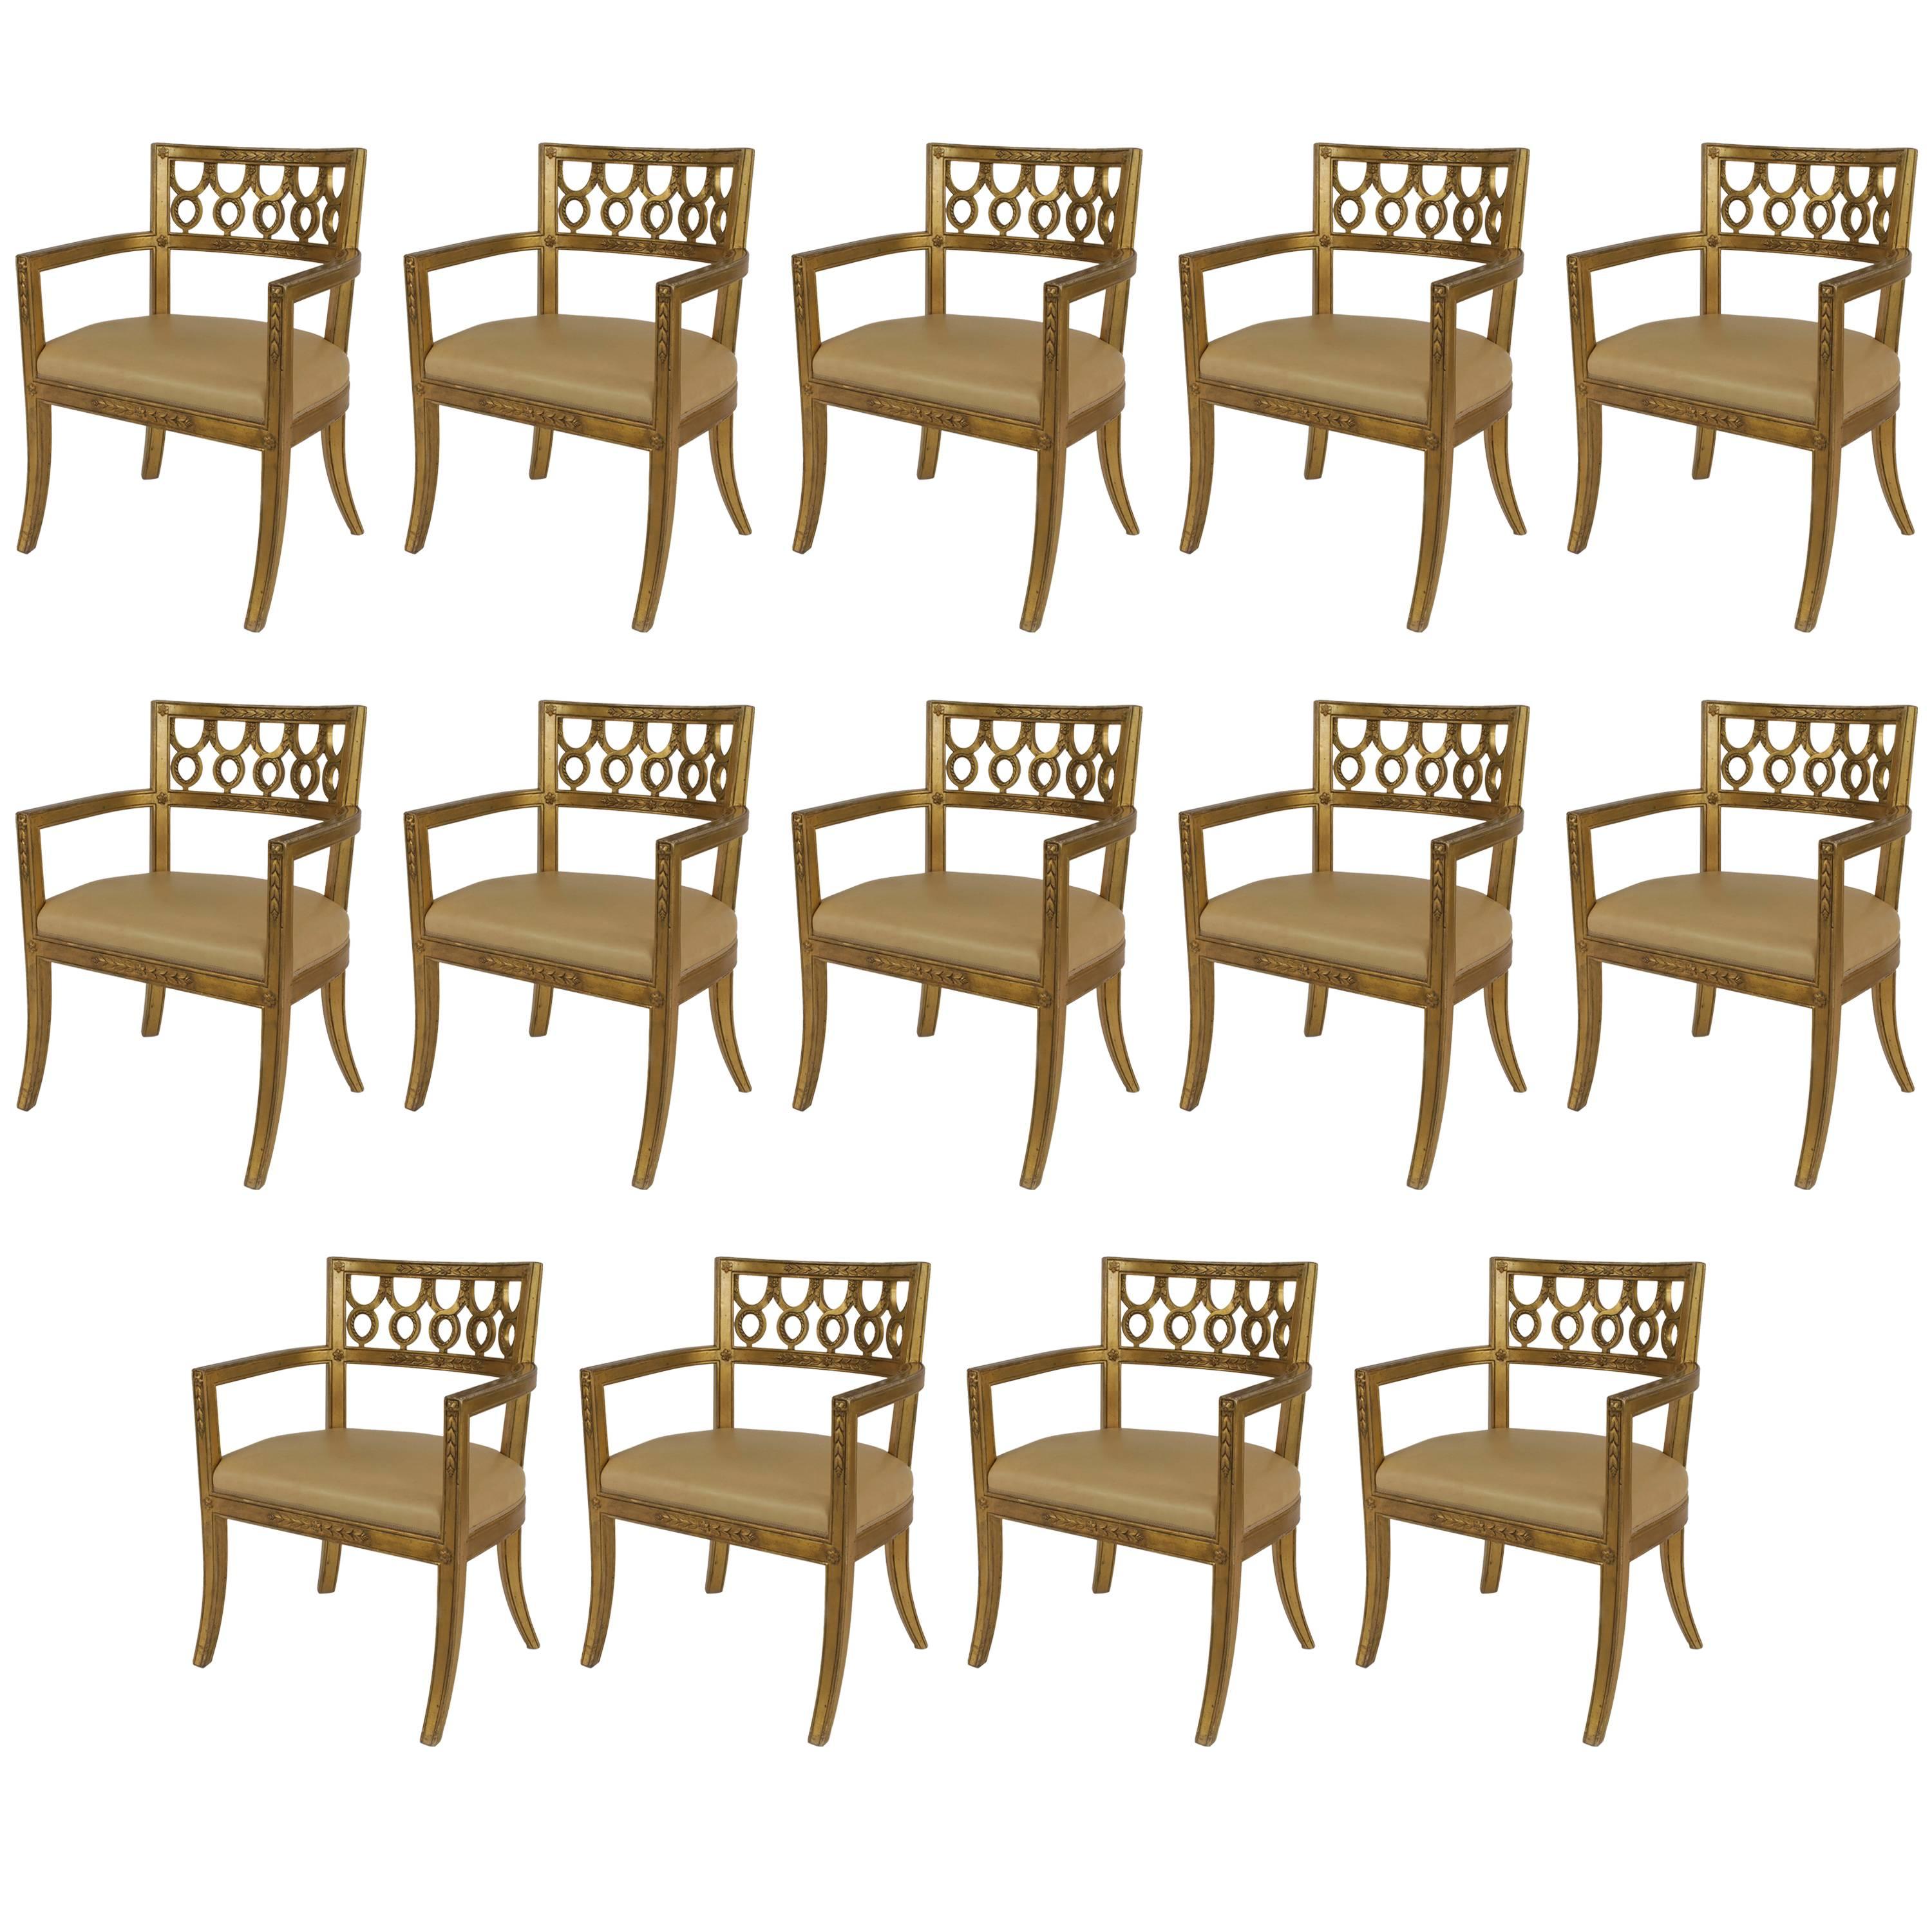 12 Italian Neo-Classic Wooden Arm Chairs